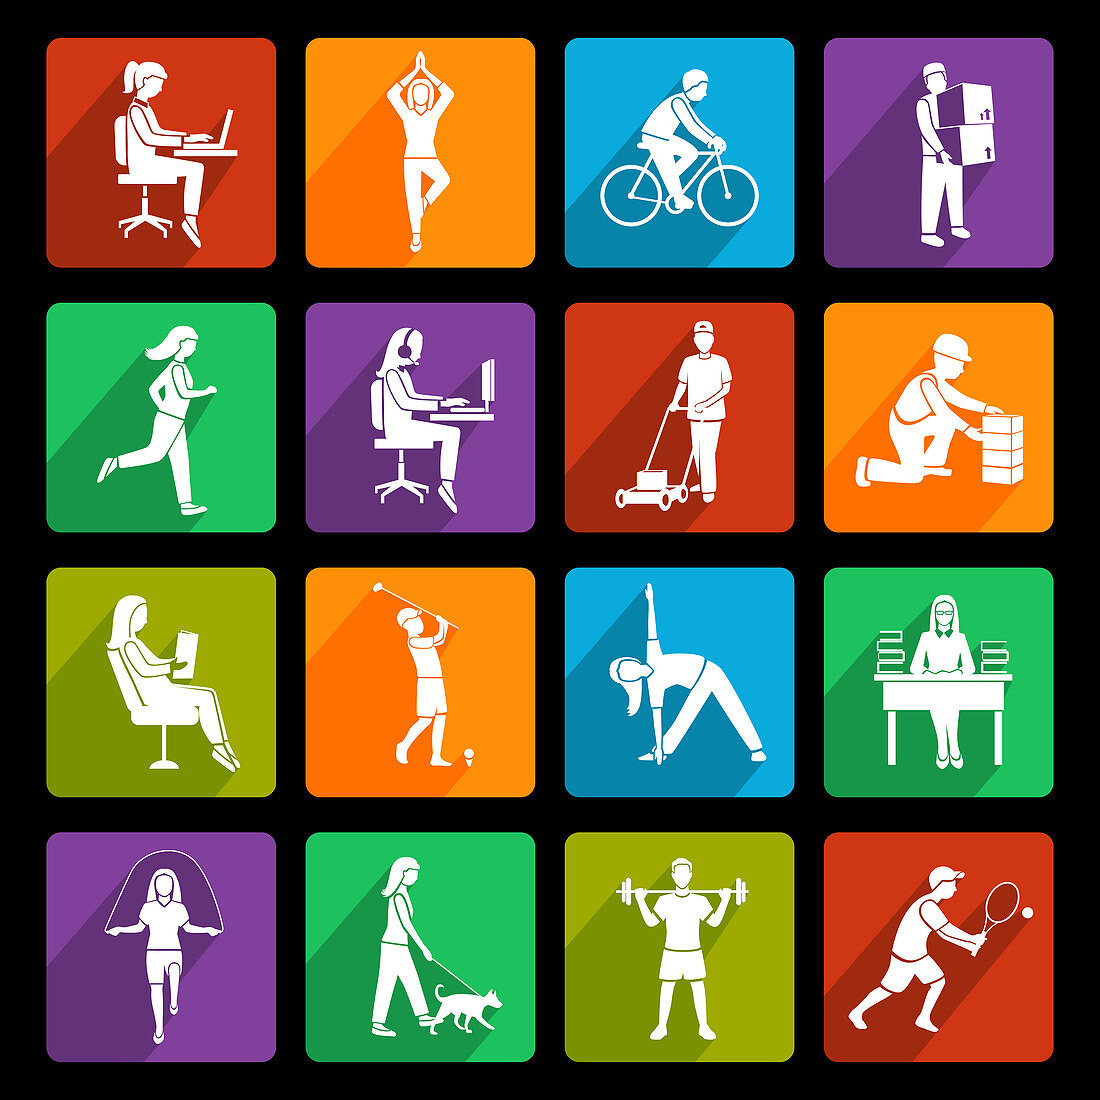 Physical activity icons, illustration